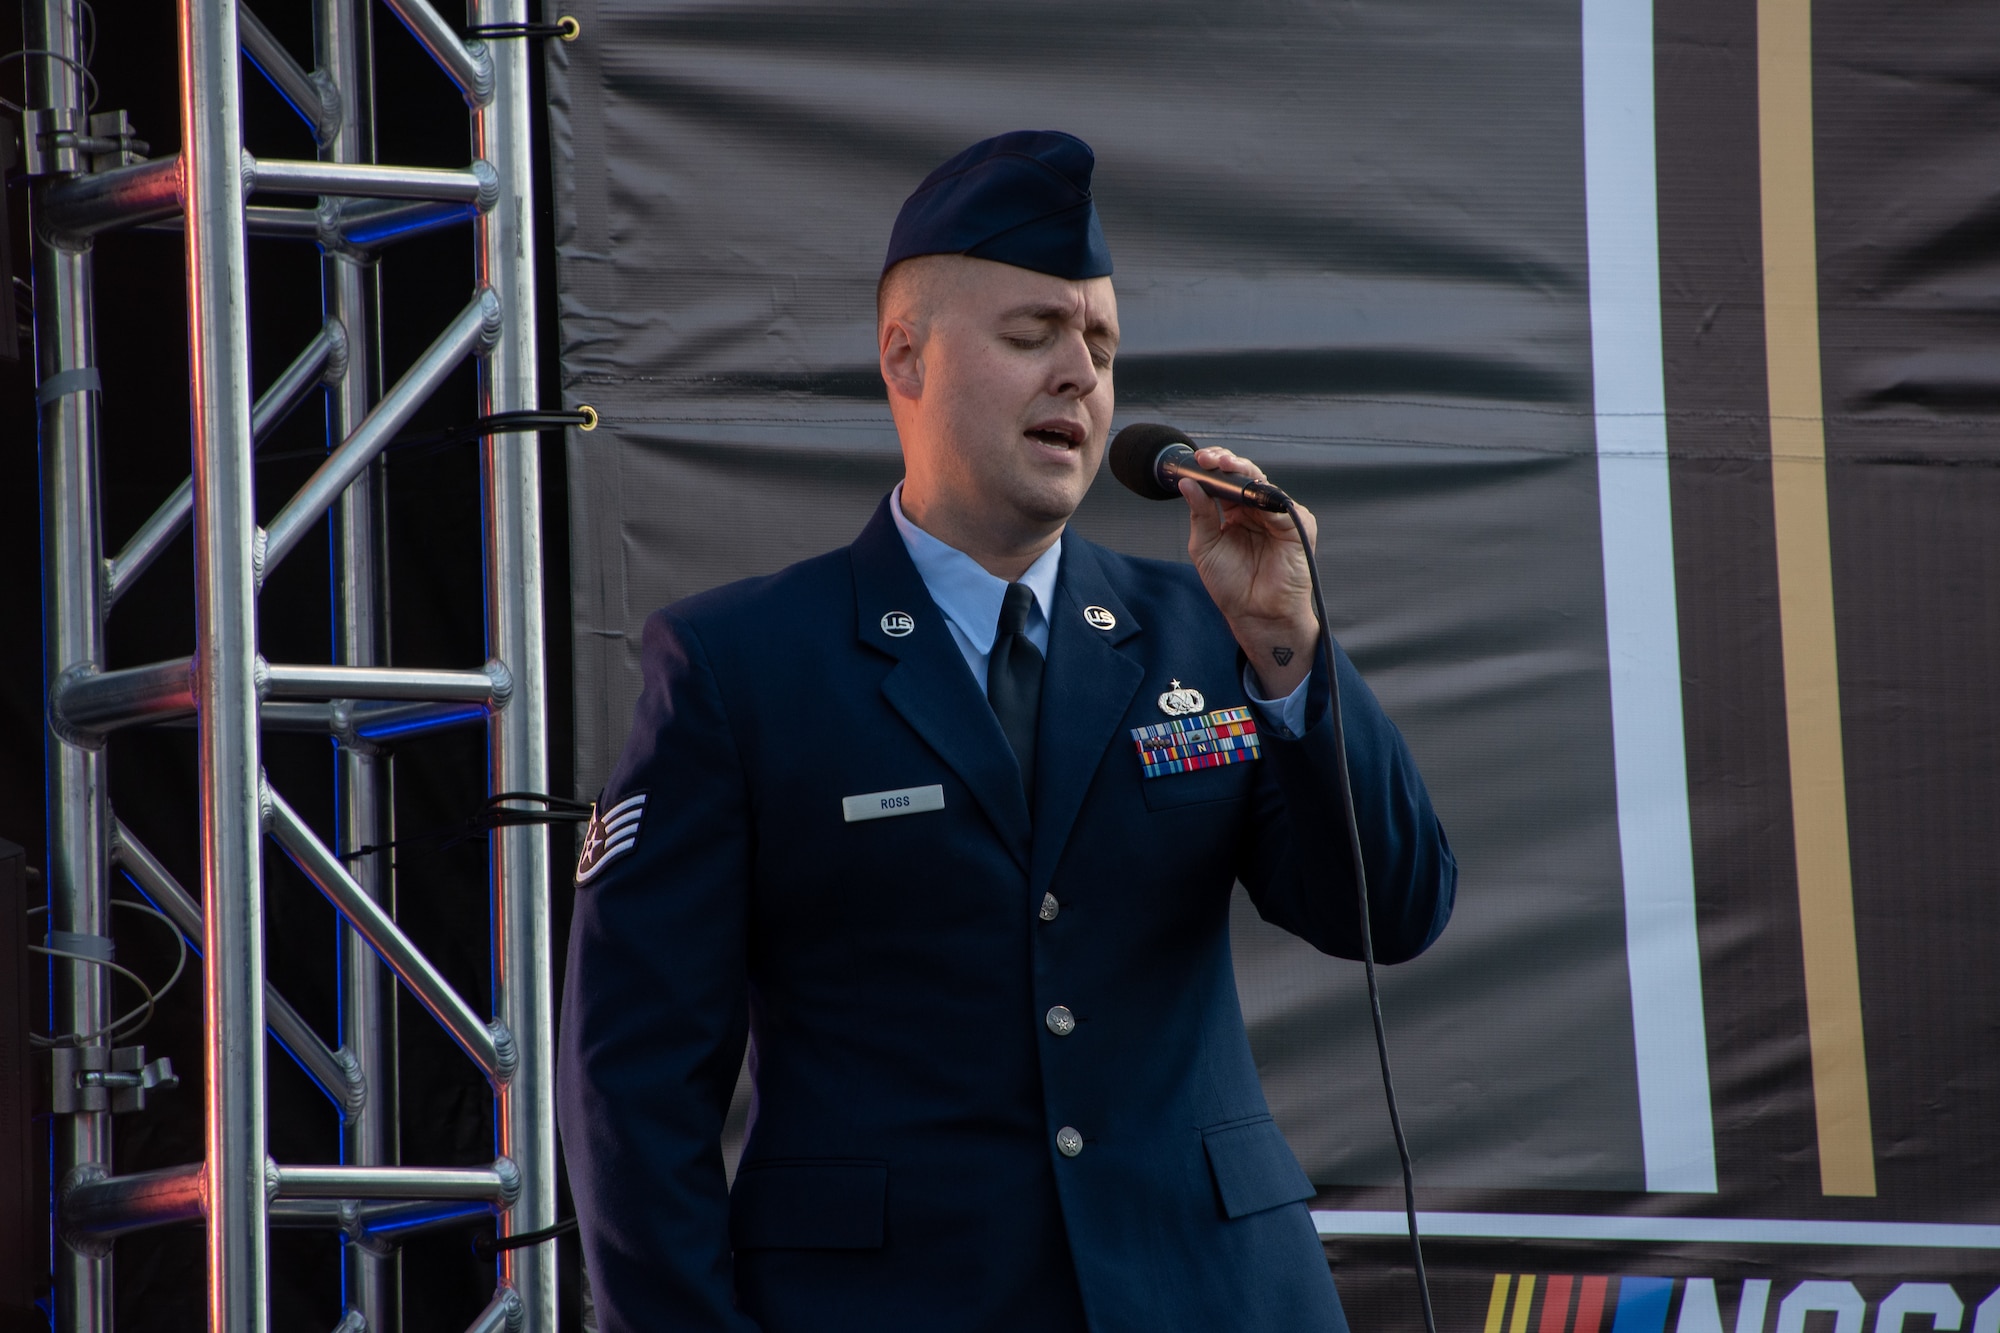 U.S. Air Force Staff Sgt. Alexander Ross, 509th Bomb Wing fuels systems NCO, sings the National Anthem during the NASCAR Hollywood Casino 400 at the Kansas Speedway in Kansas City, Kansas, Sept. 11, 2022. Whiteman Air Force Base Airmen supported pre-race festivities to represent the U.S. Air Force.(U.S. Air National Guard photo by Airman 1st Class Phoenix Lietch)